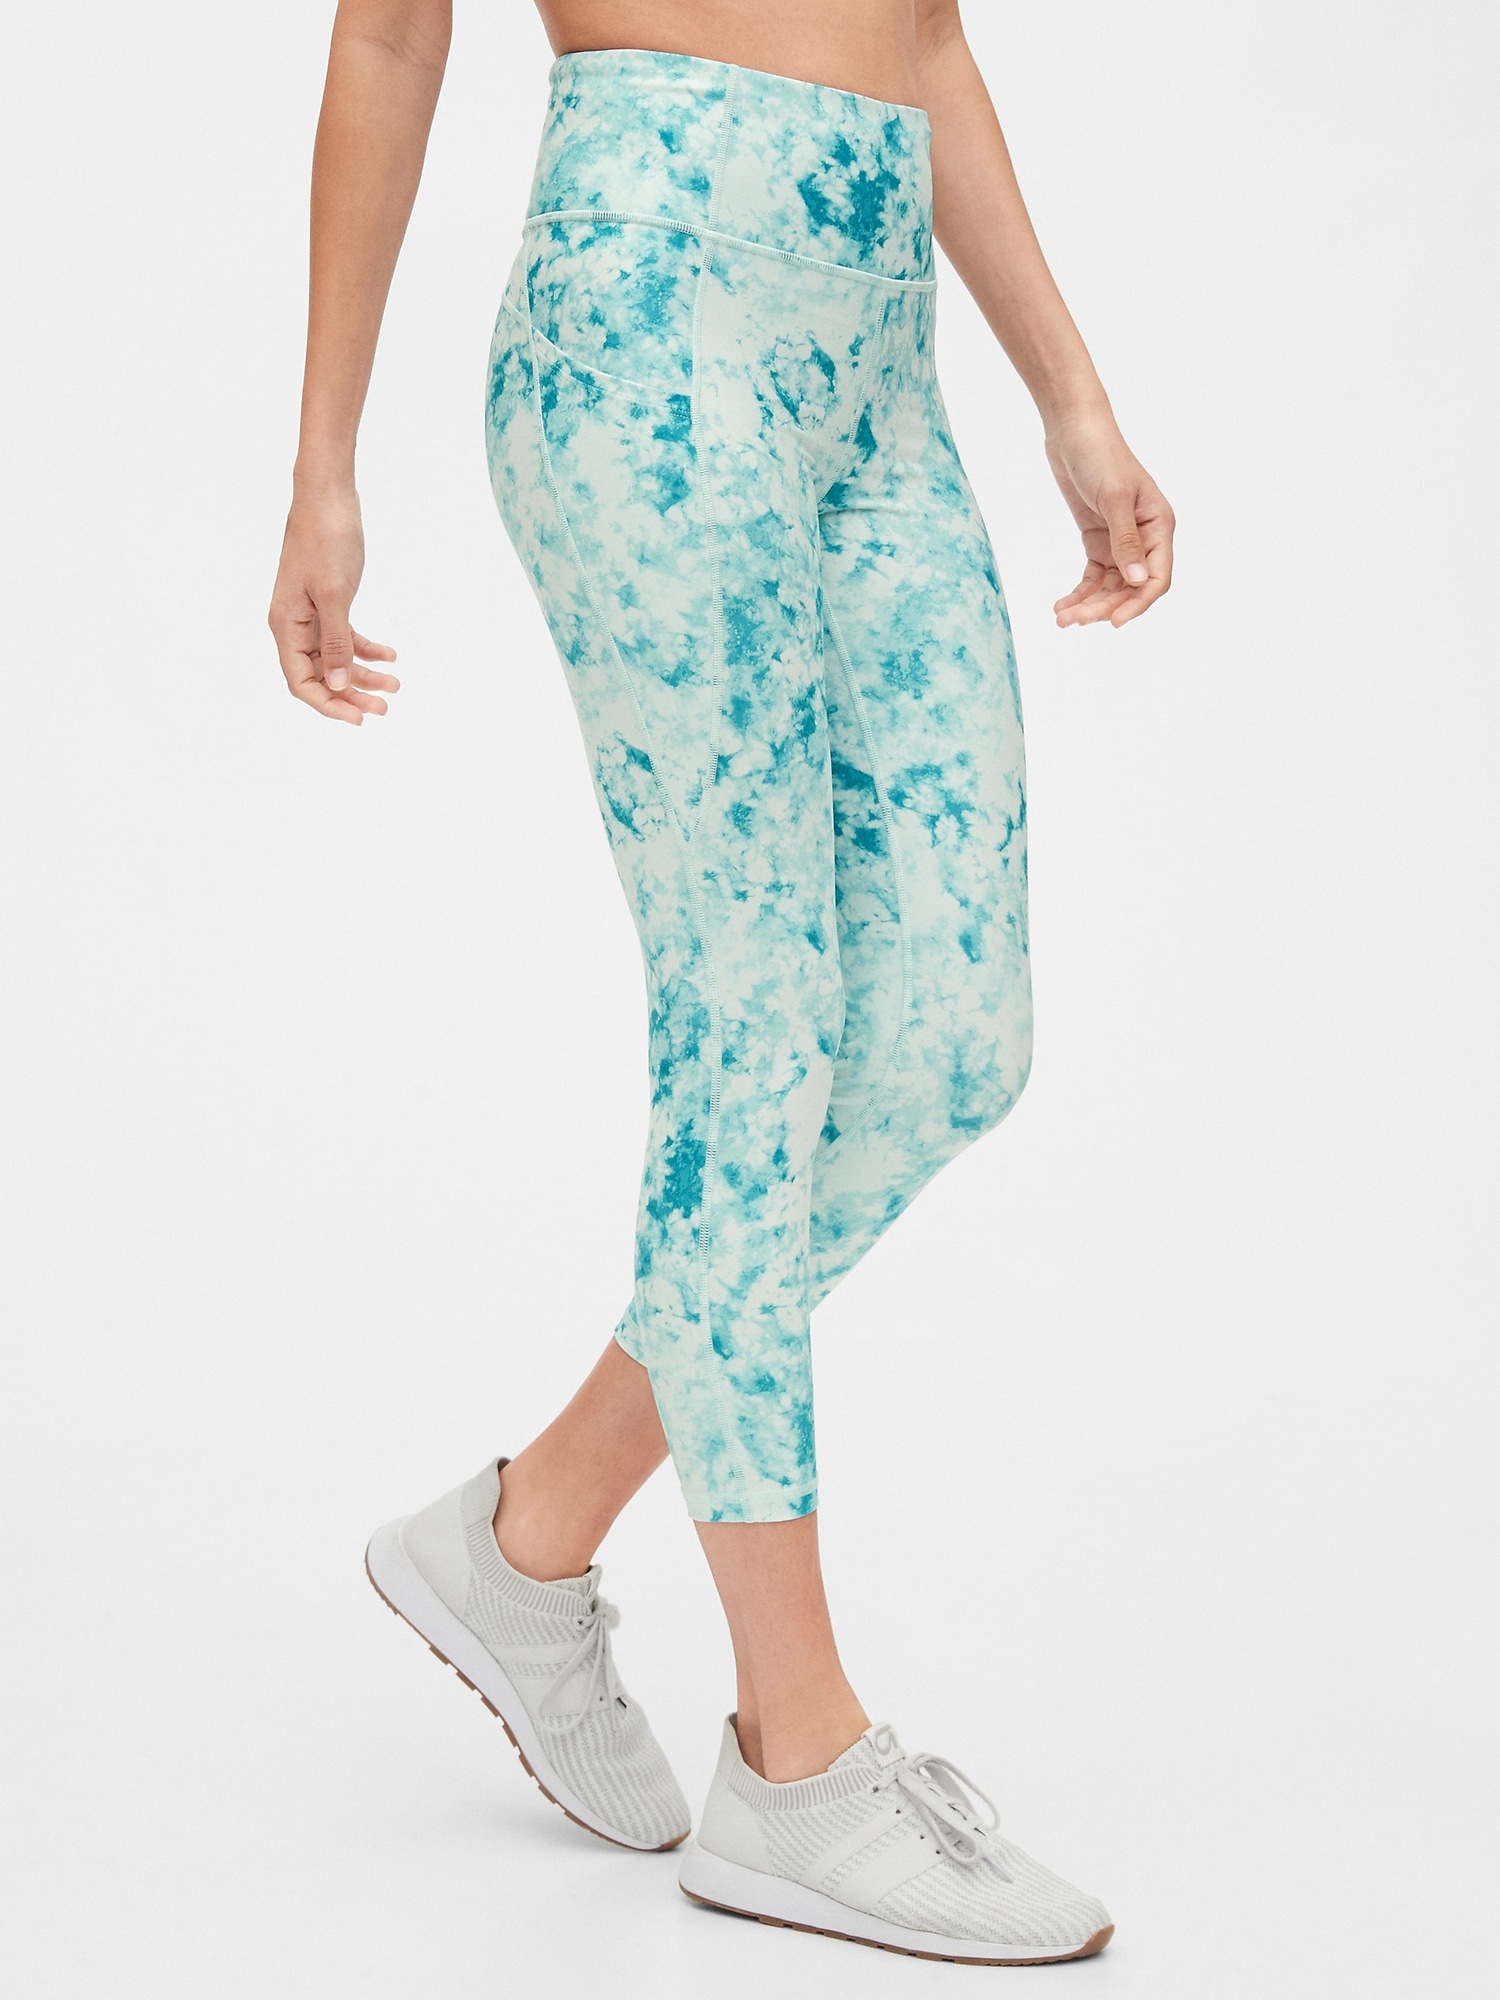 GapFit High Rise Eclipse Honeycomb 7/8 Leggings, 27 Cute Workout Clothes  to Grab When You're Bored of Basic Black Pieces